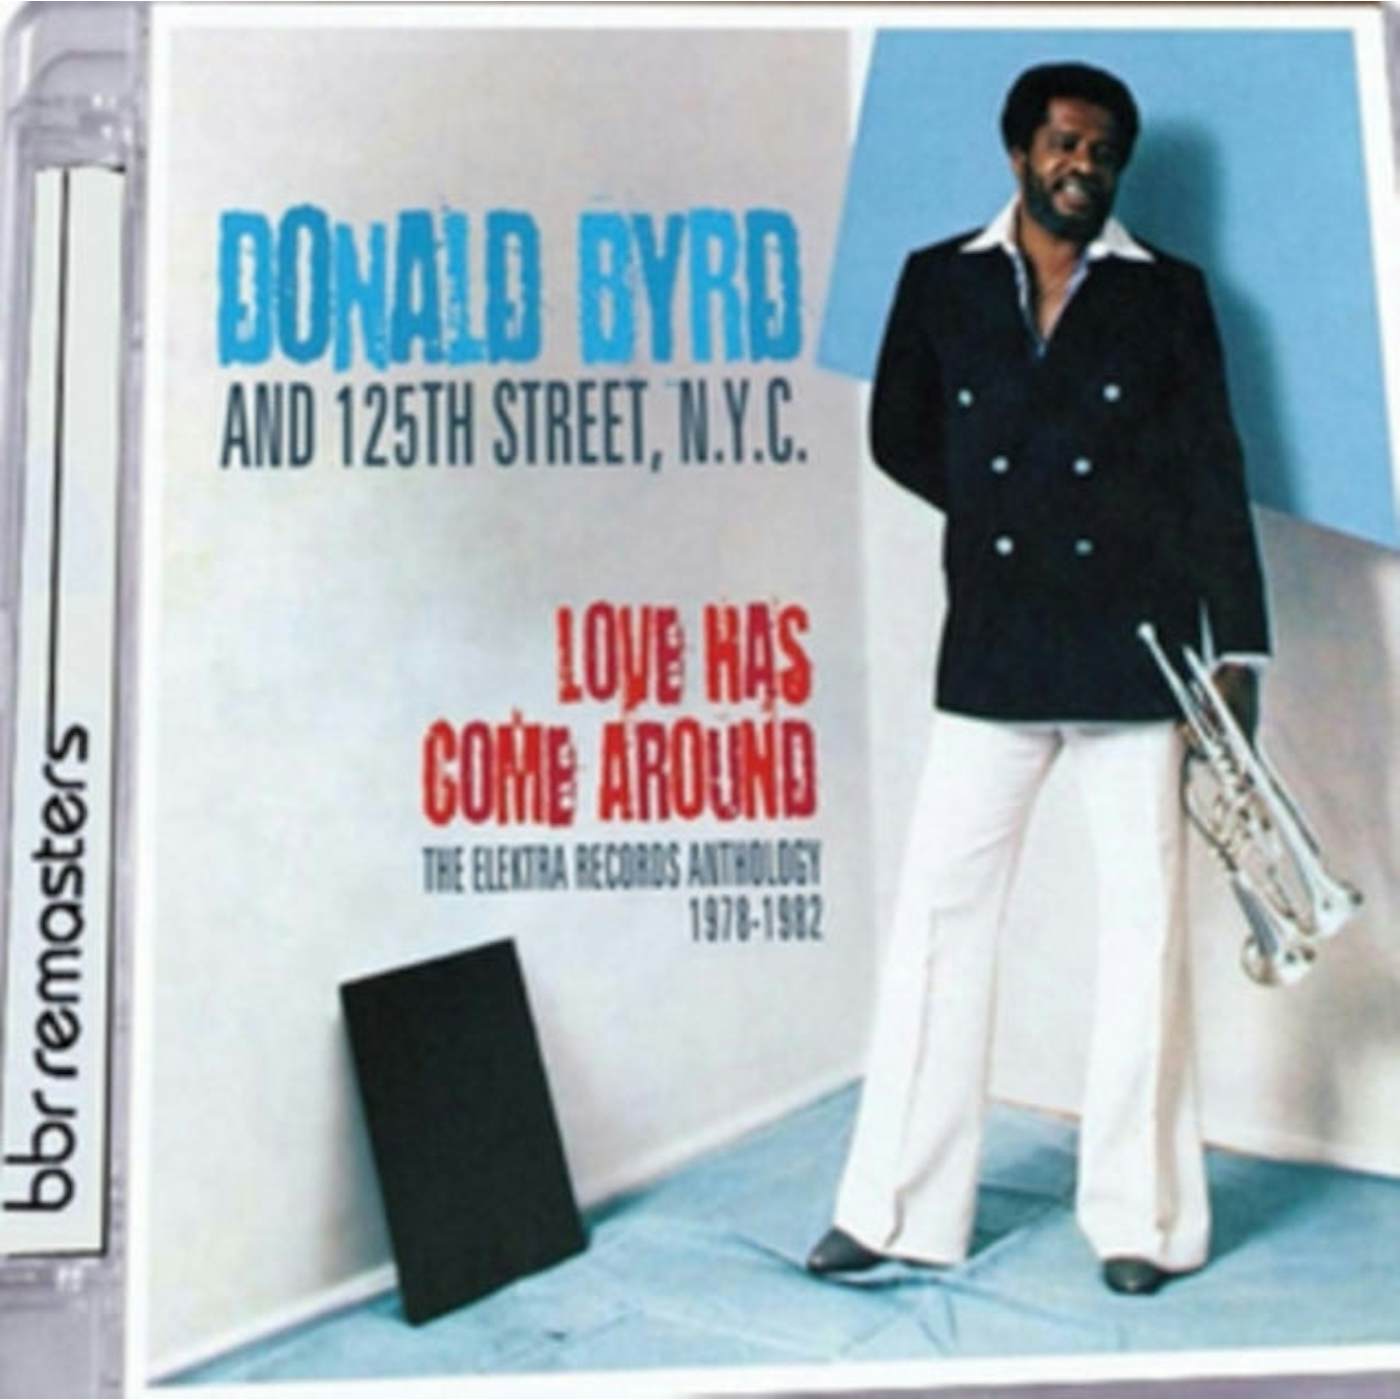 Donald Byrd CD - Love Has Come Around: The Elektra Records Anthology 19 78-19 82